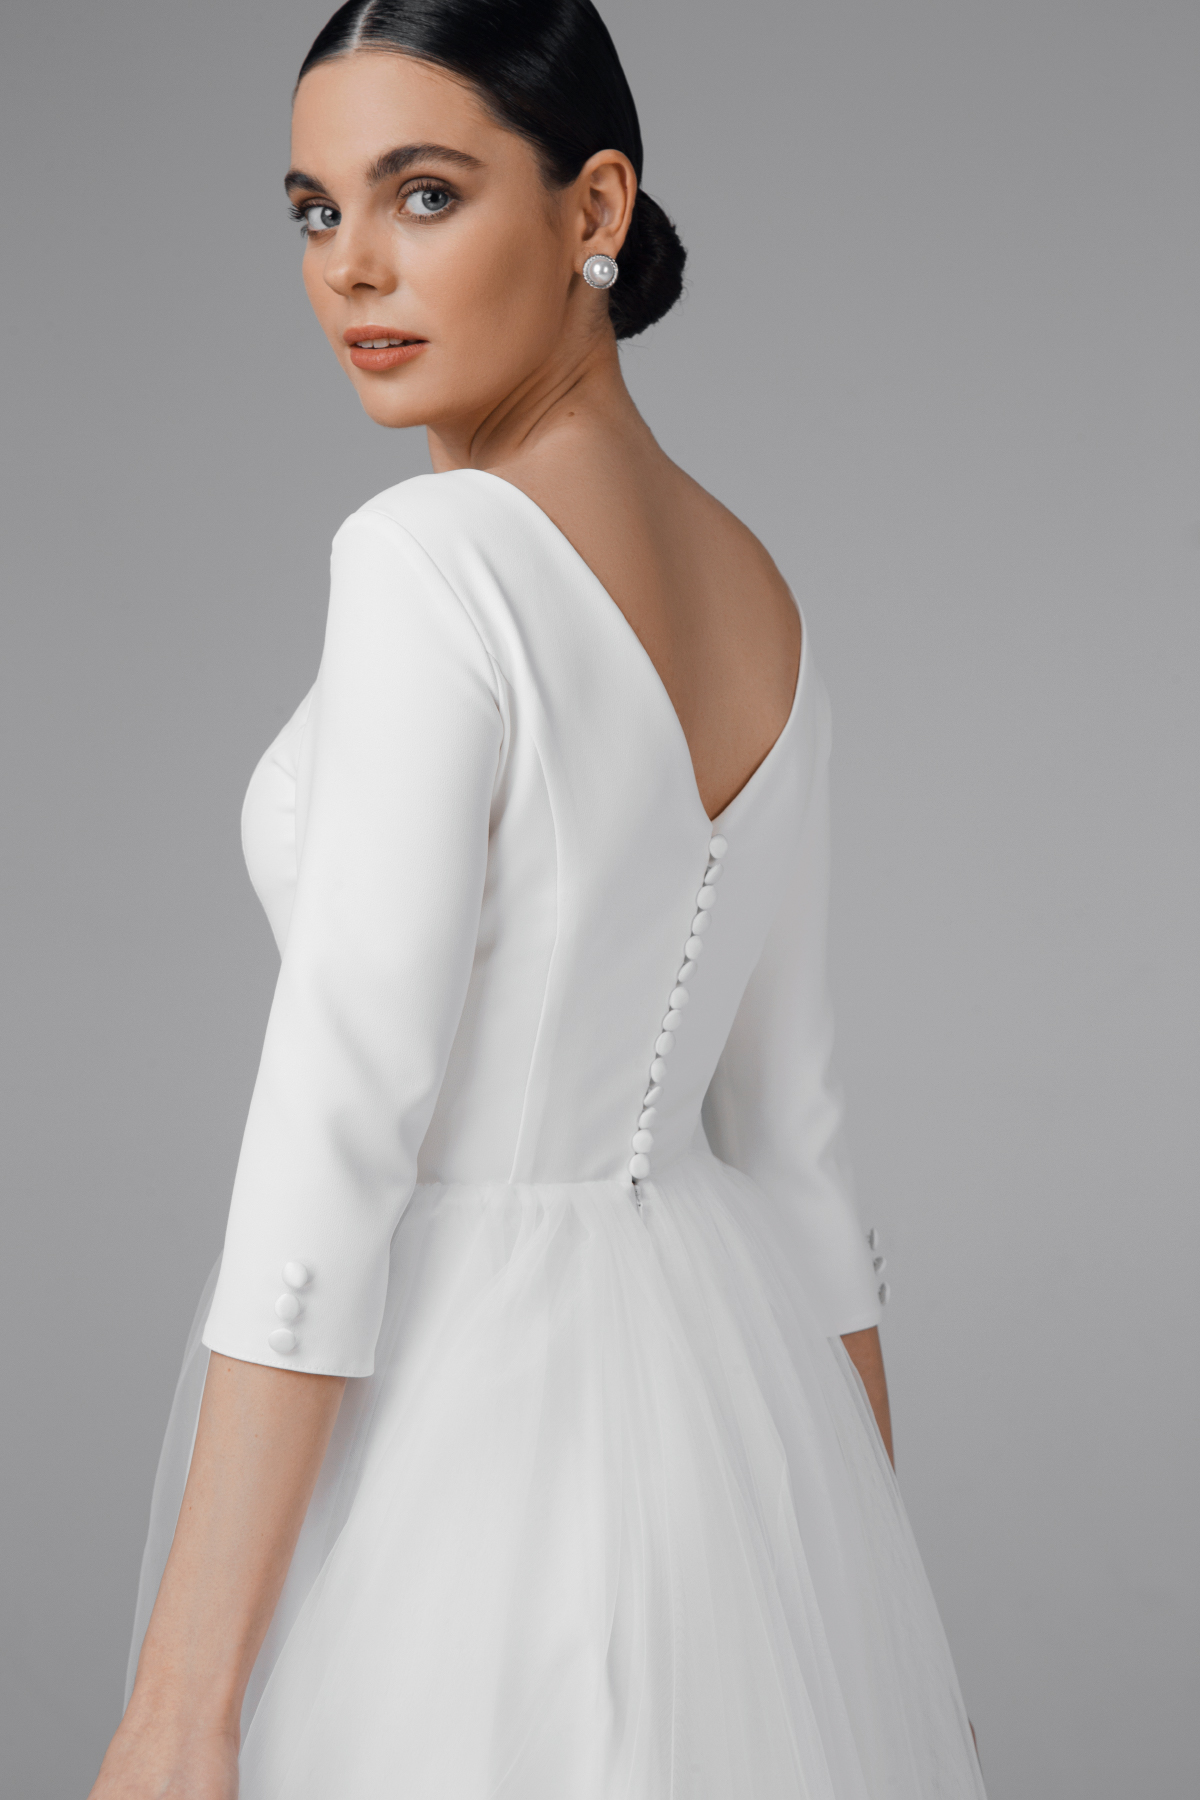 Short wedding dress with sleeves